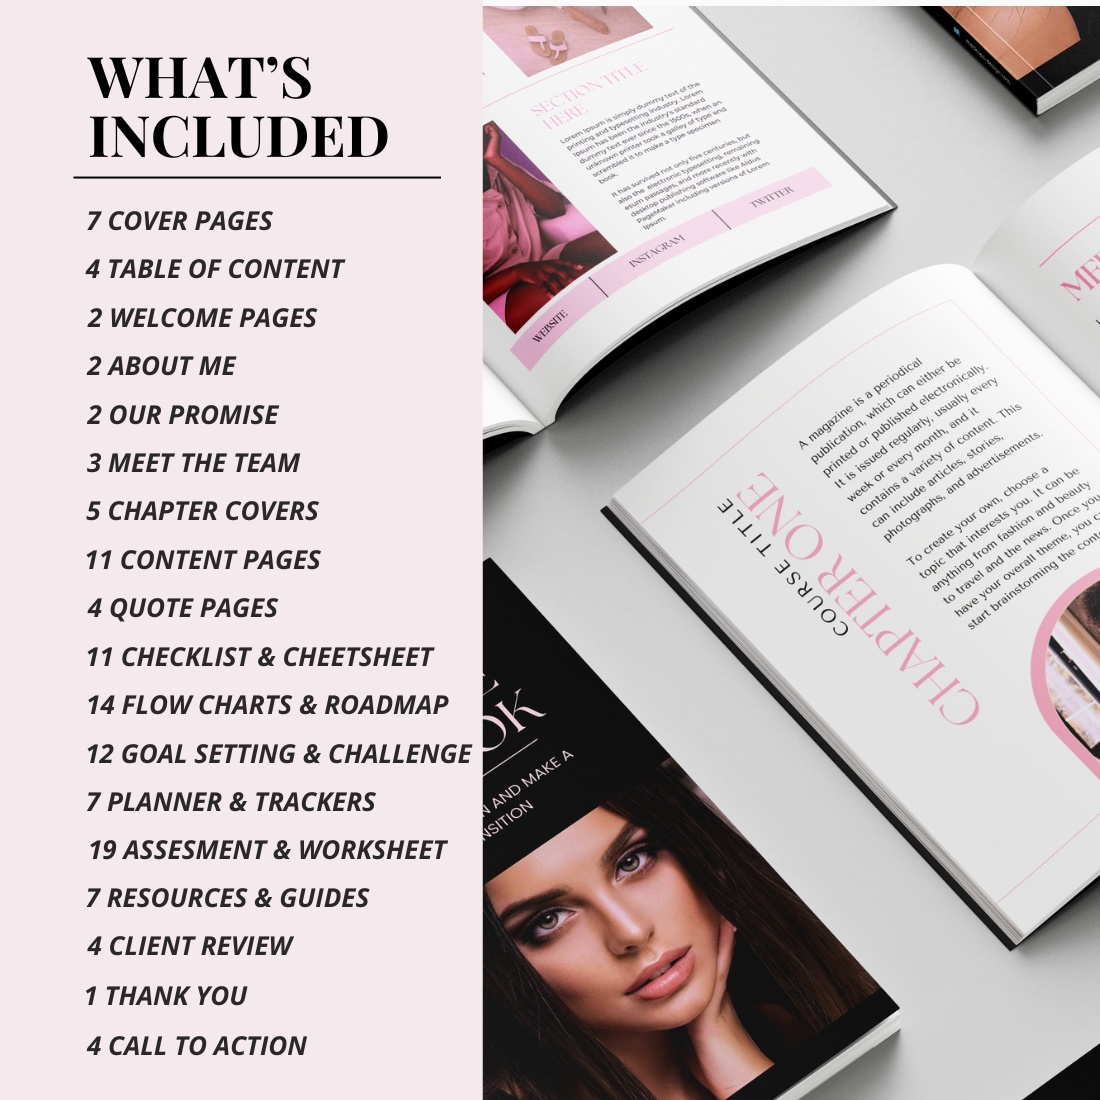 Ebook Template Canva | Coaching Guide Book Canva Template| Lead Magnet Ebook | Course Creator Template | Modern Workbook | Coaching Workbook | Worksheet eBook, Coaches, Bloggers, Opt In, Charts, Checklists, Planners, Webinar, Challenges Template | preview image.